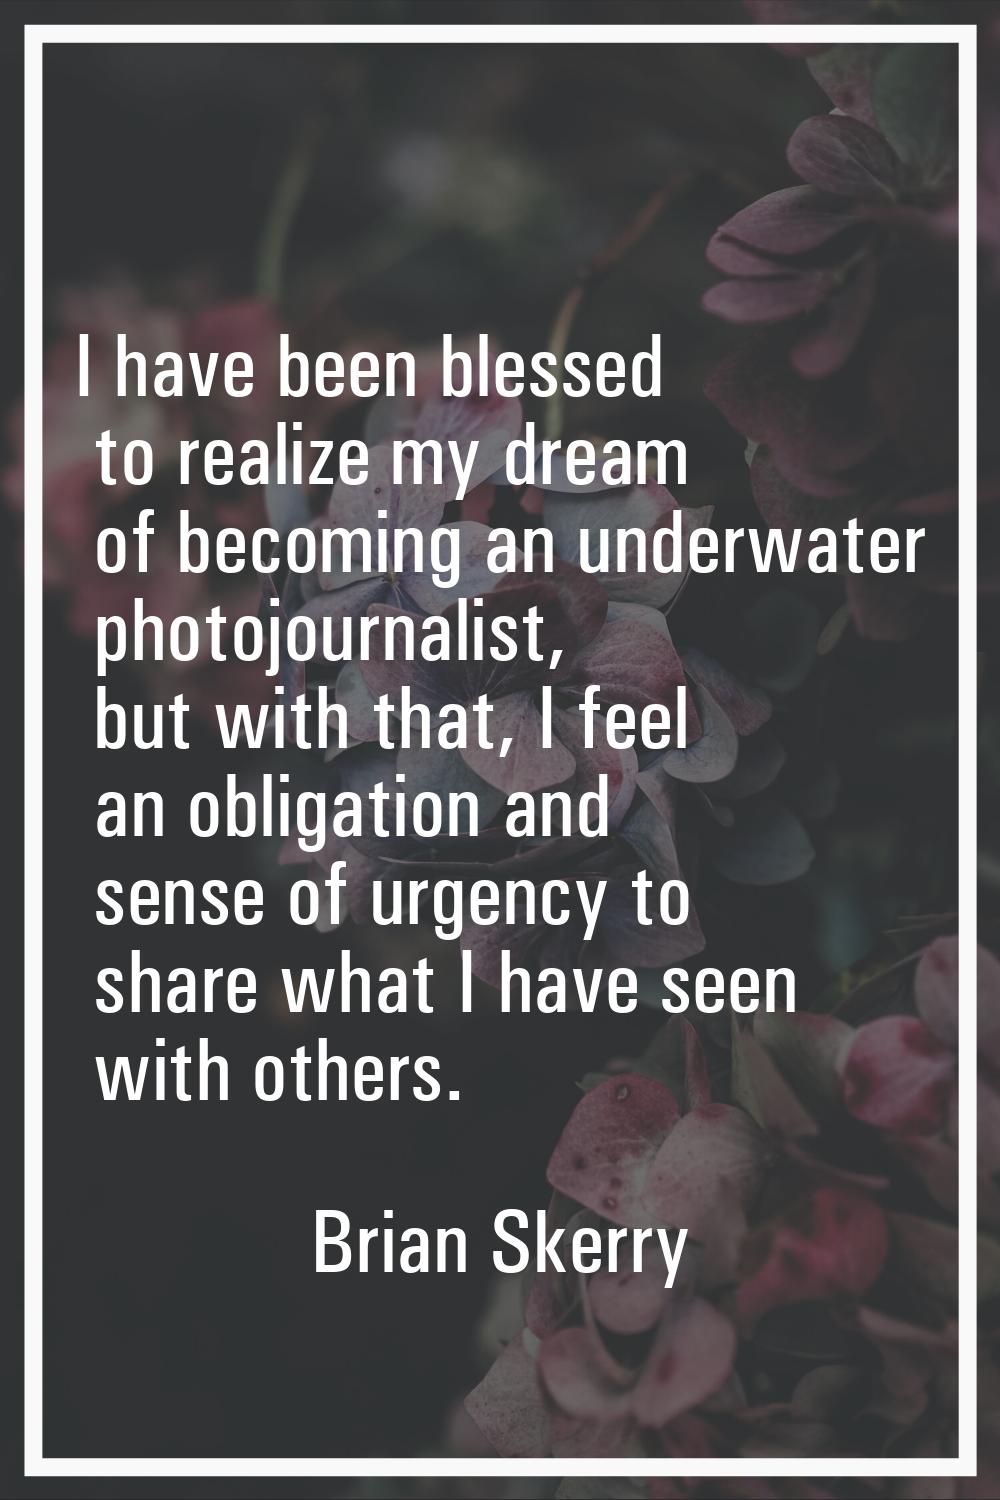 I have been blessed to realize my dream of becoming an underwater photojournalist, but with that, I